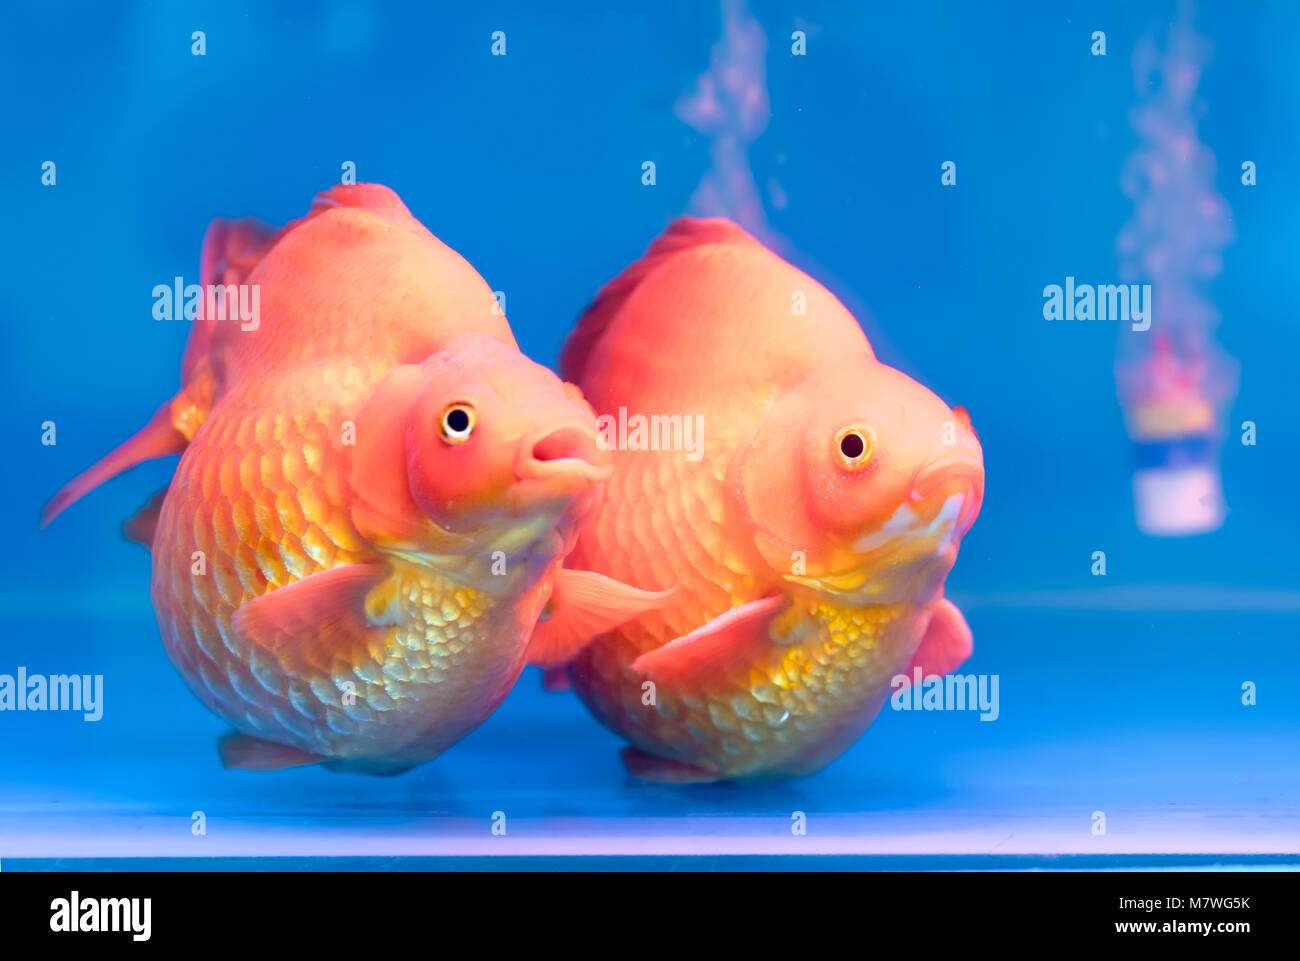 One of most popular pet ornamental fish is goldfish or Carassius auratus, Family Cyprinida. Ranchu or lionhead goldfish is very popular Stock Photo